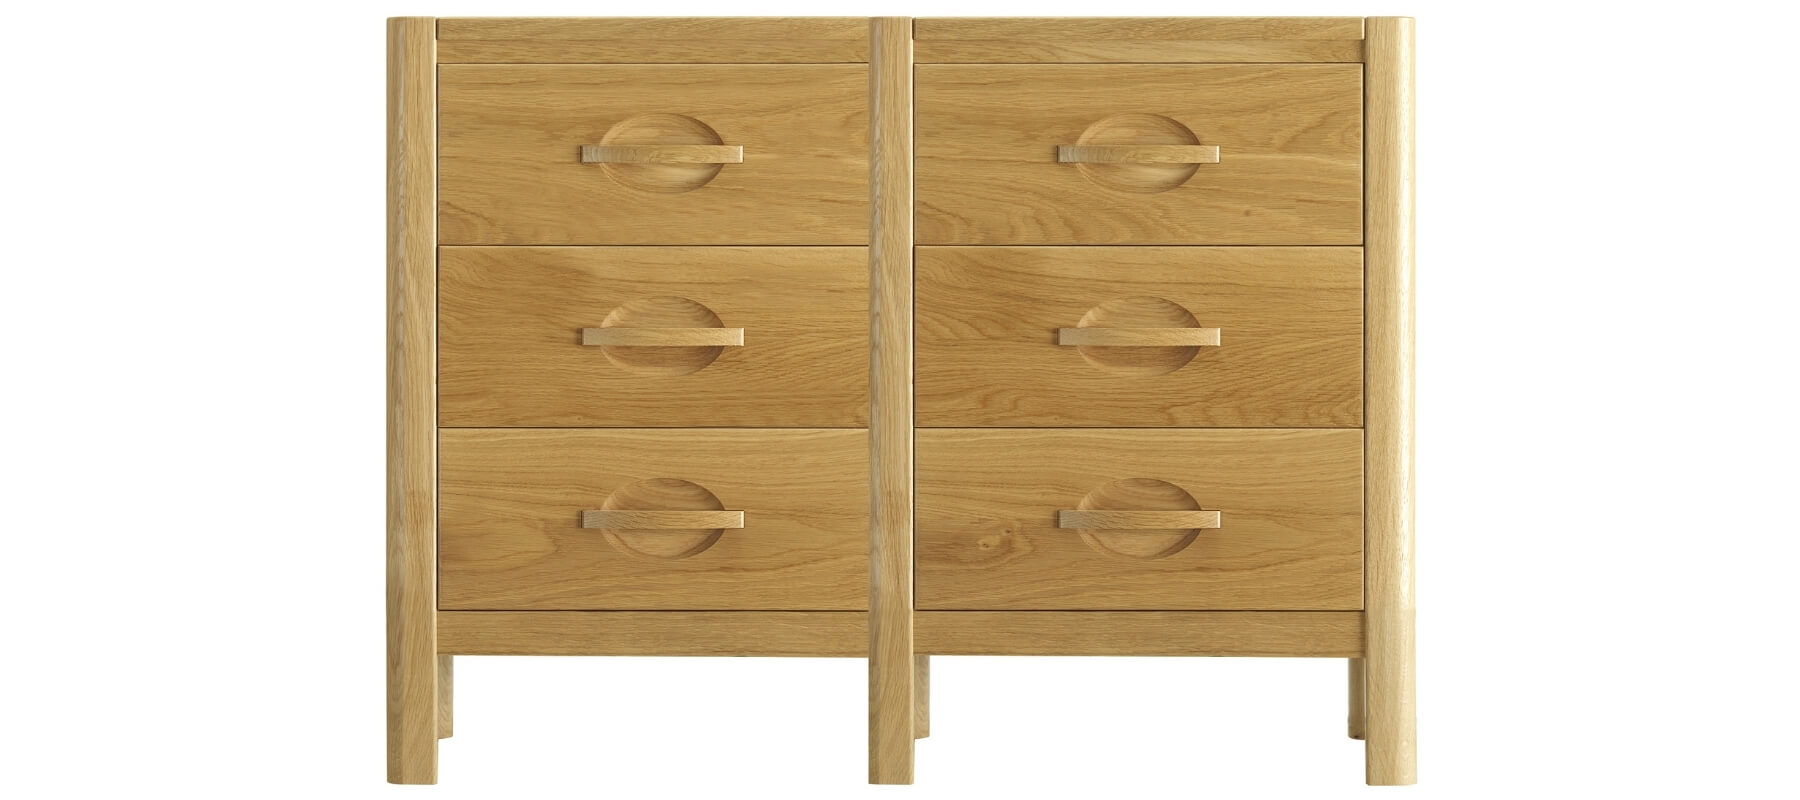 A six-drawer nightstand